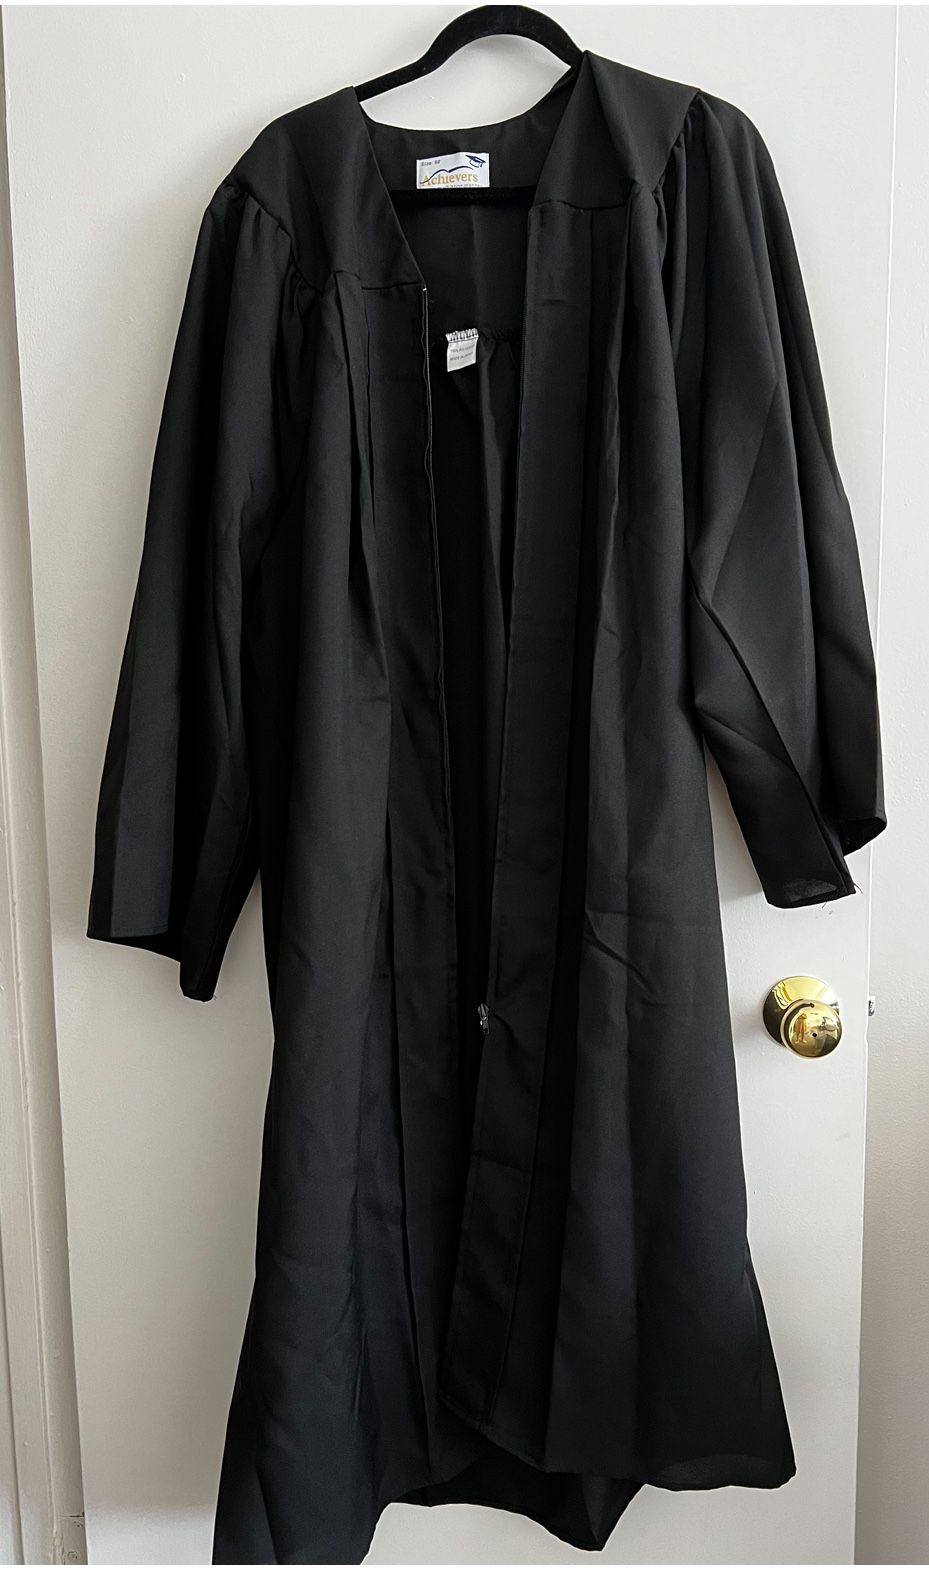 Graduation 🧑‍🎓 Cap And Gown 